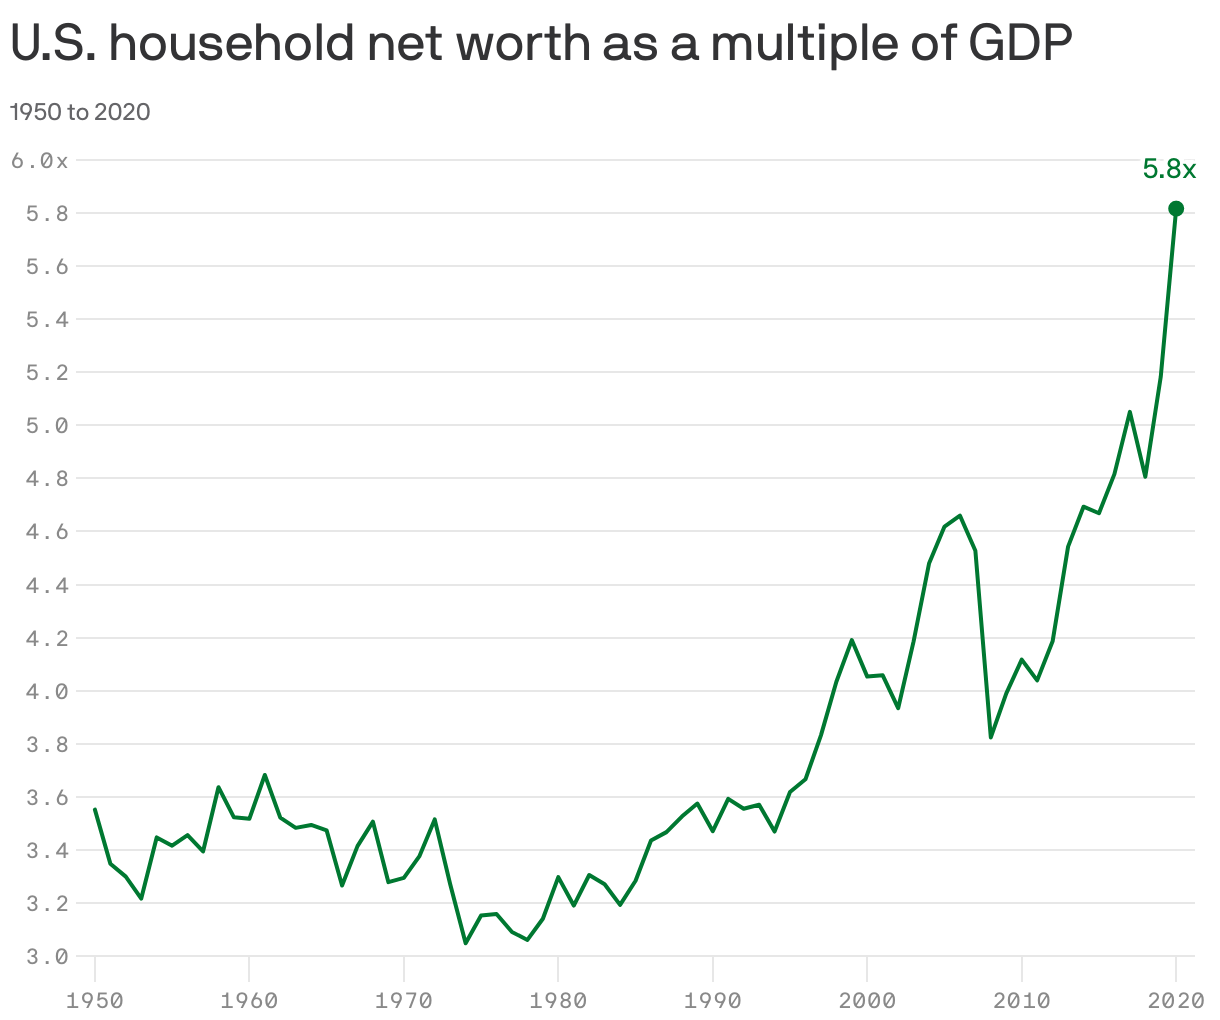 U.S. household net worth as a multiple of GDP